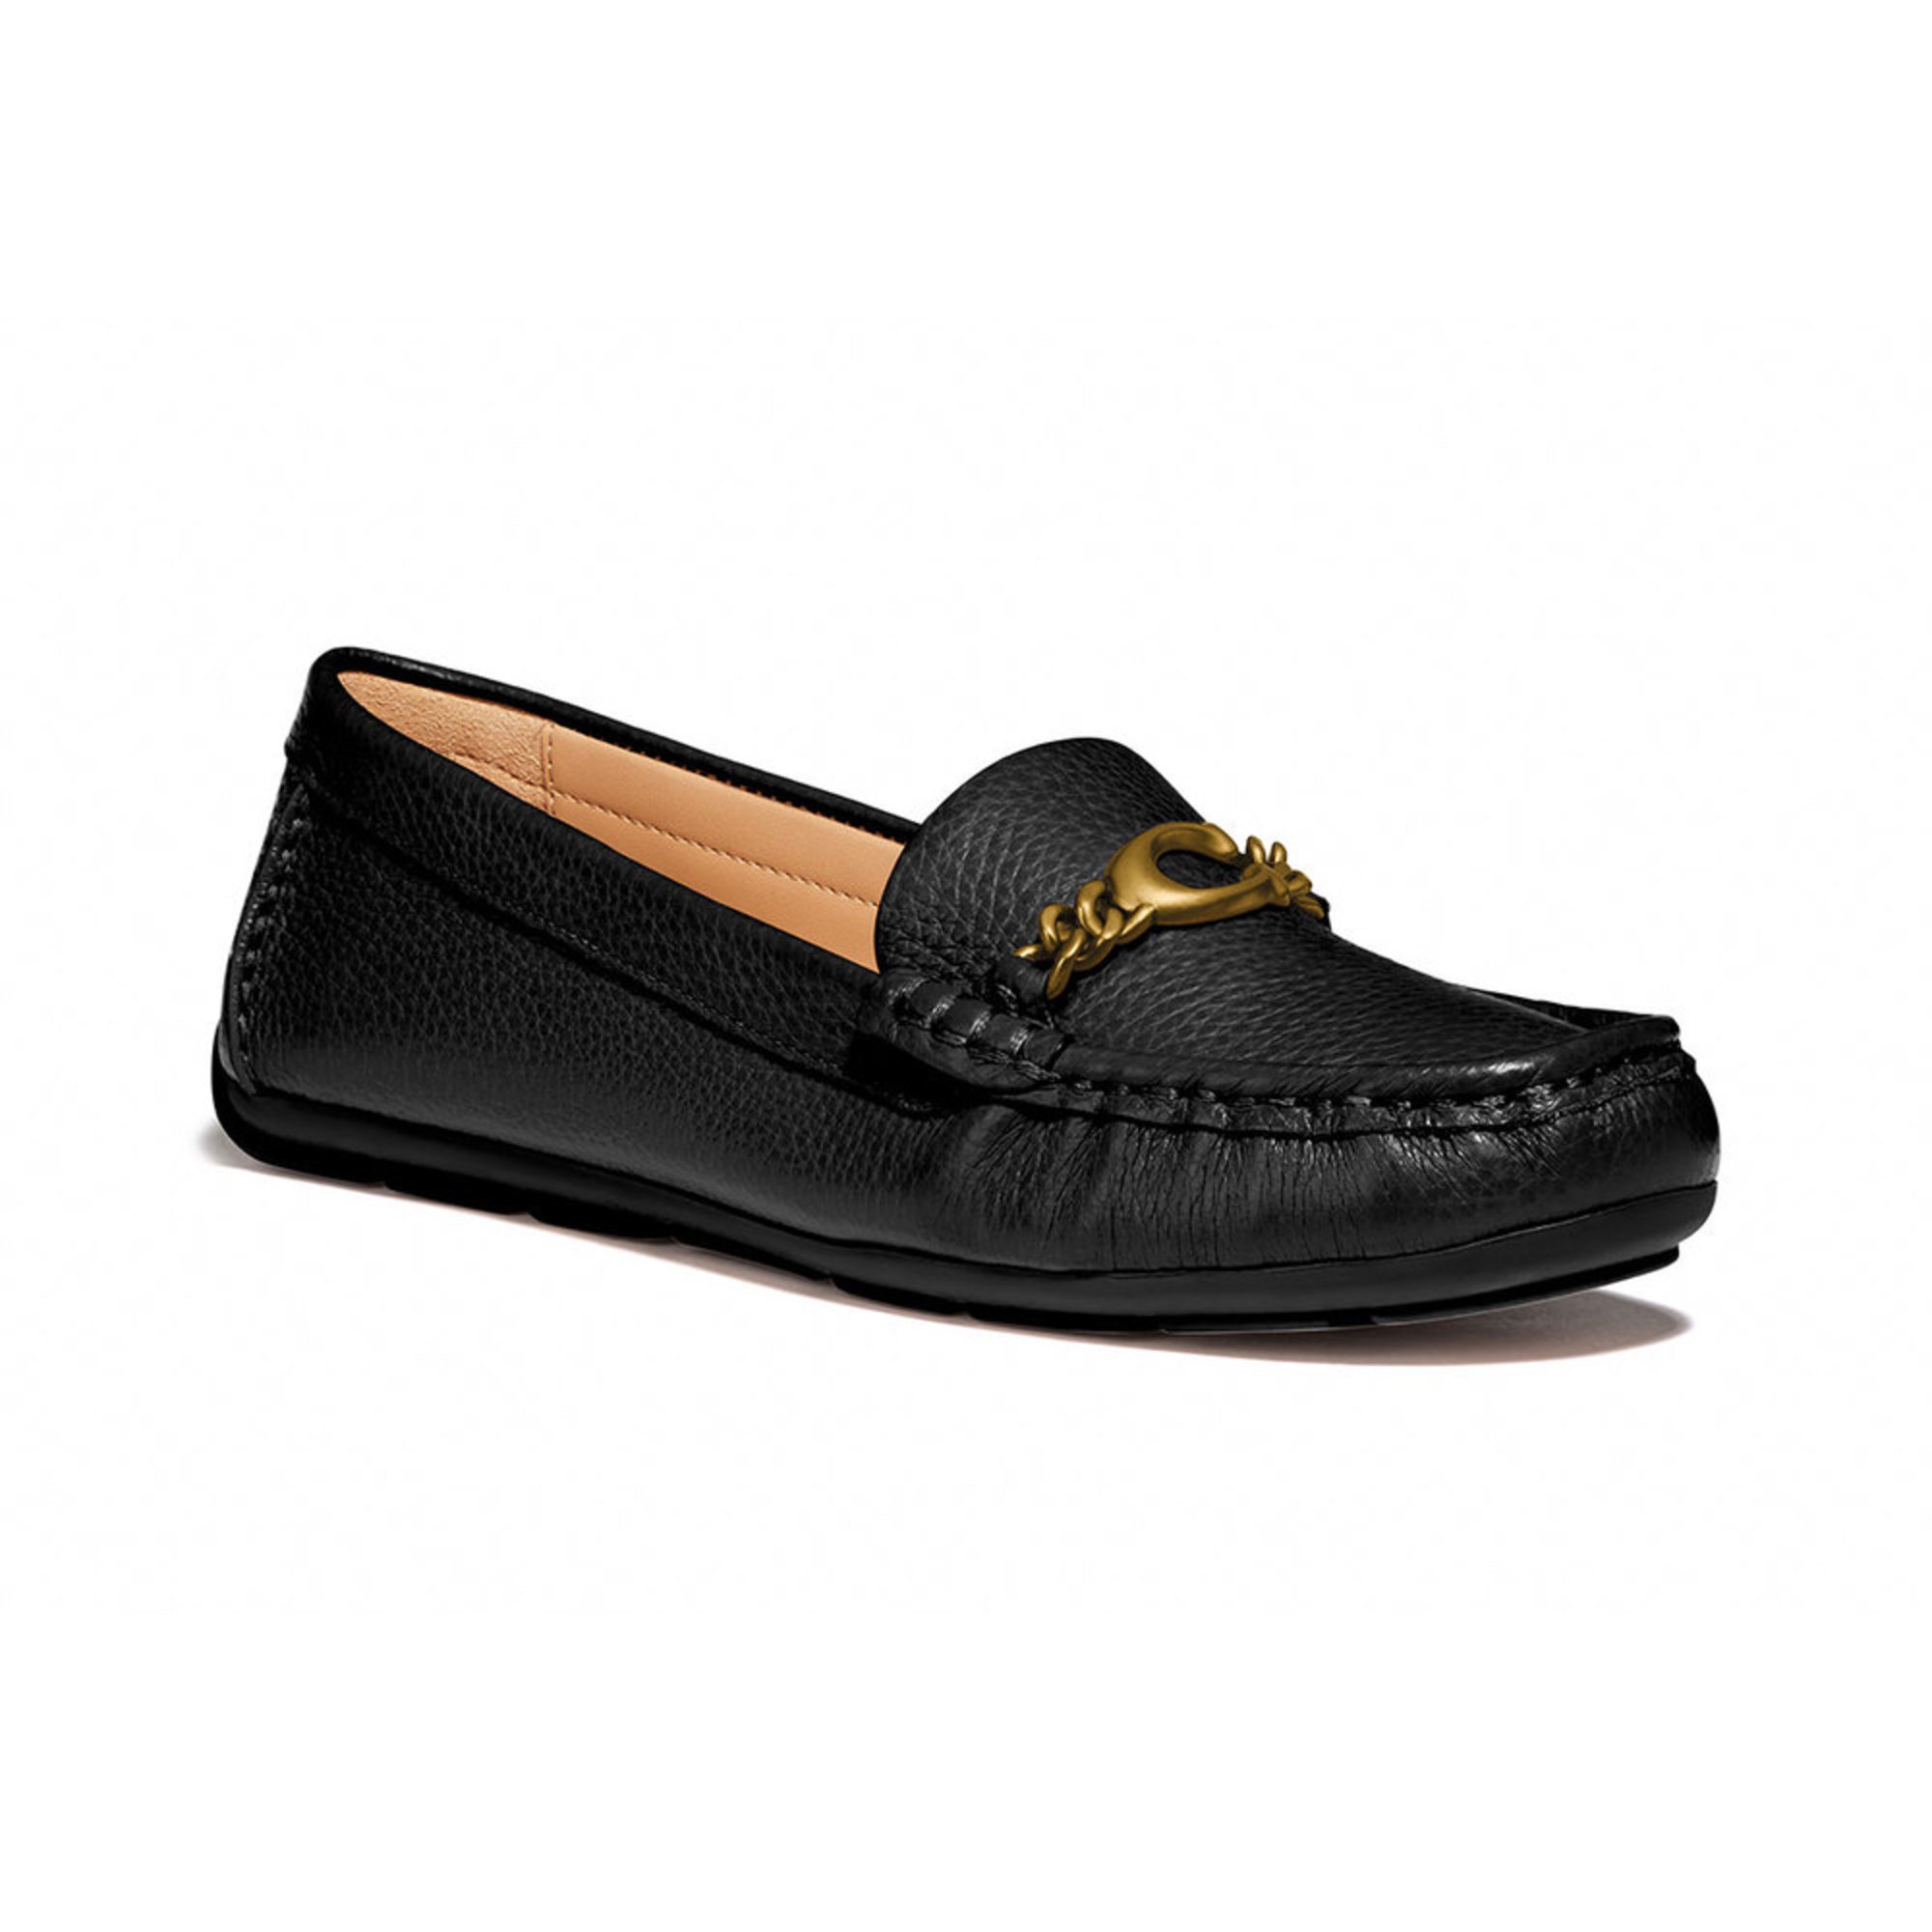 Coach Women's Maegan Nubuc Driver | Women's Loafer And Boat Shoes ...